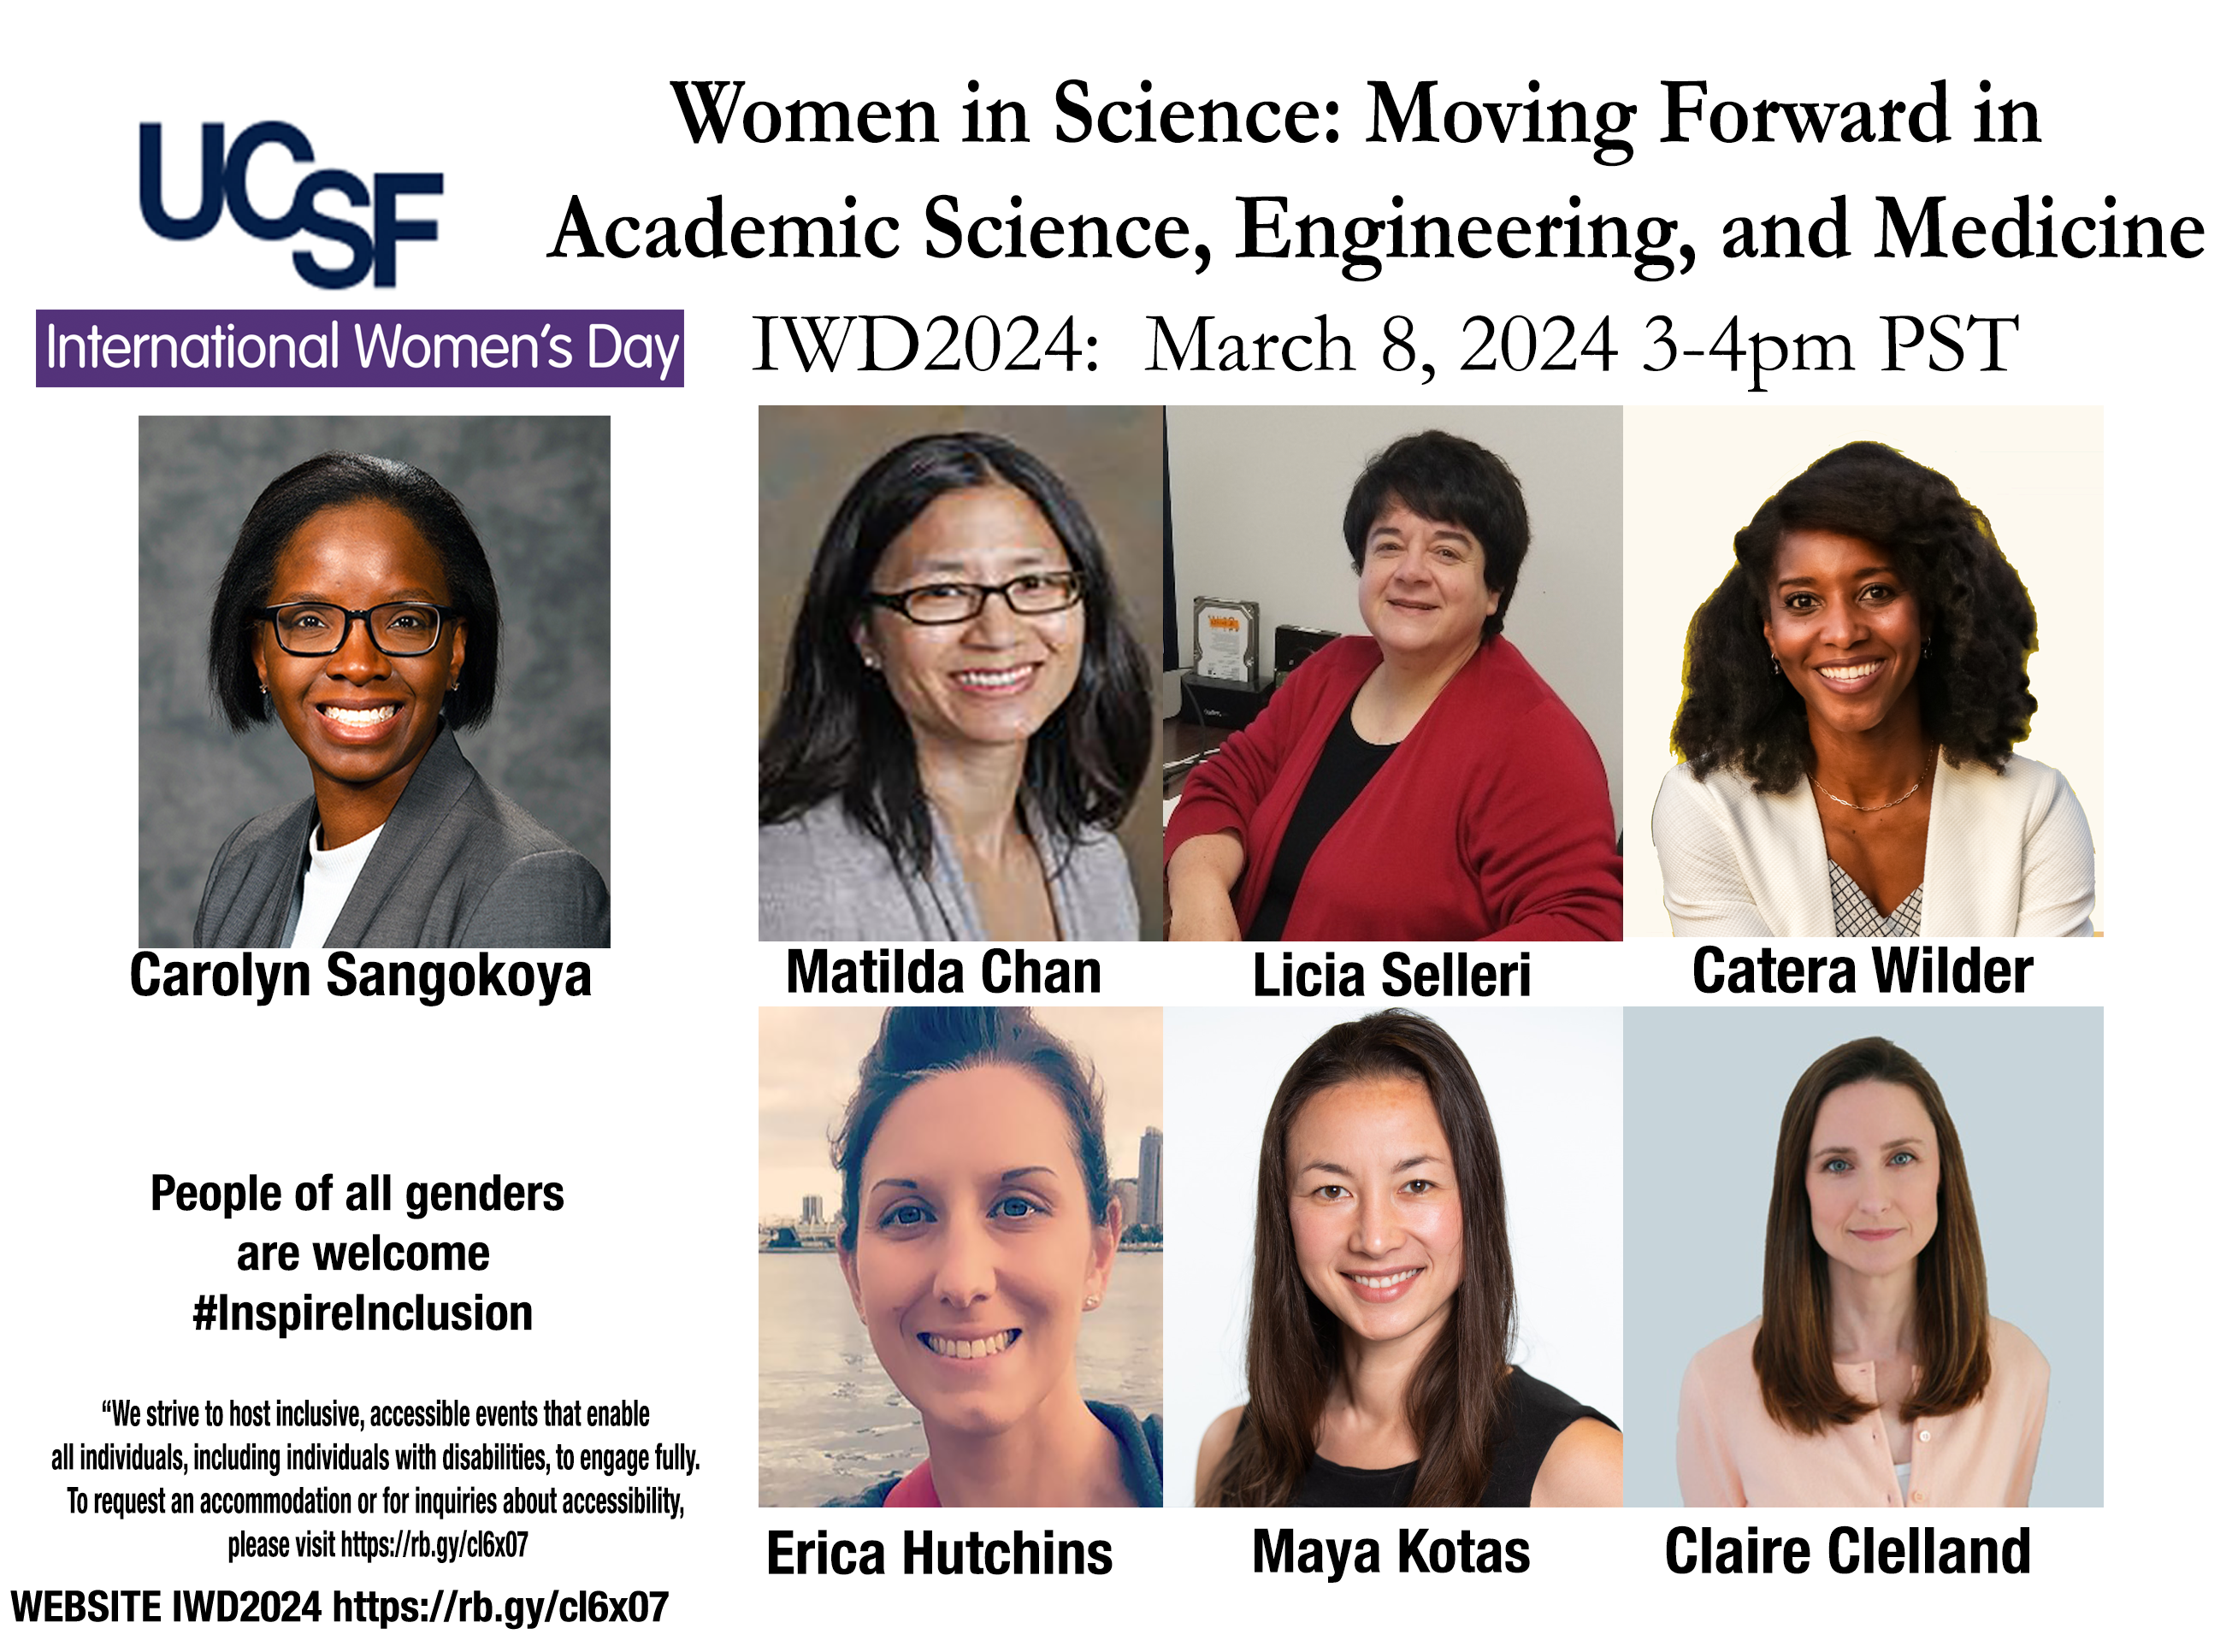 Women in Science: Moving Forward in Academic Science, Engineering, and Medicine